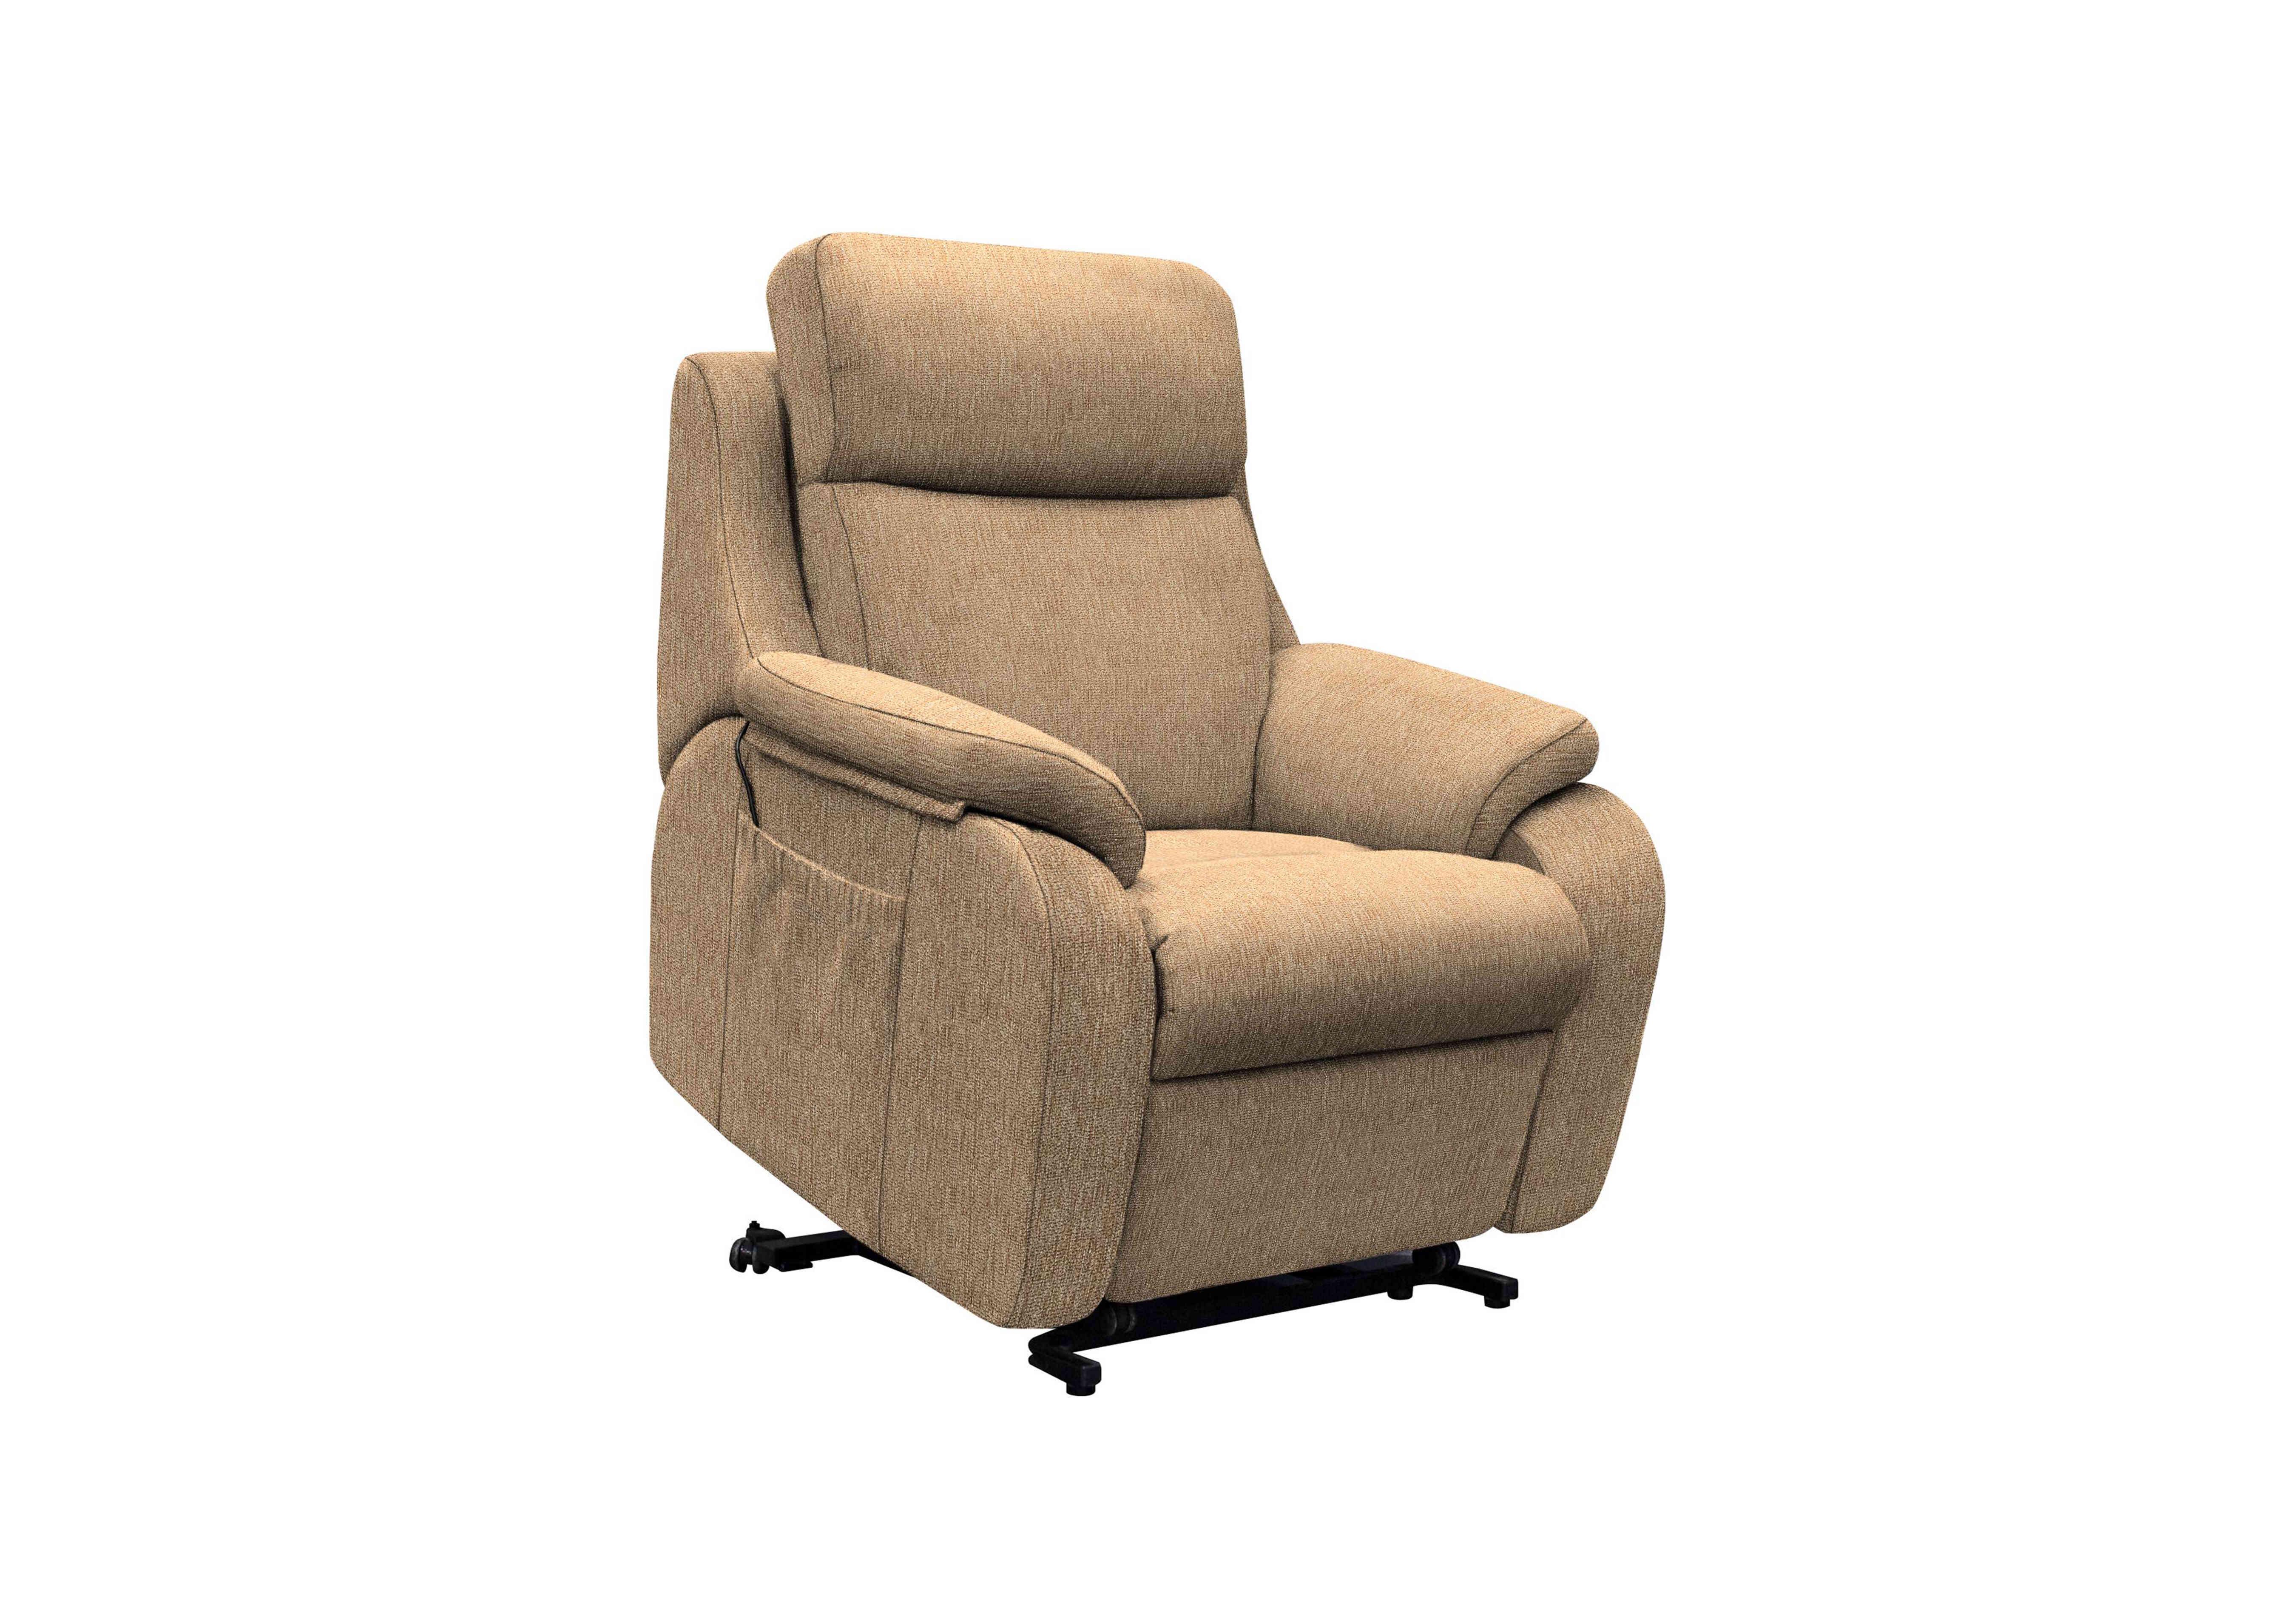 Kingsbury Large Fabric Lift and Rise Chair in A070 Boucle Cocoa on Furniture Village